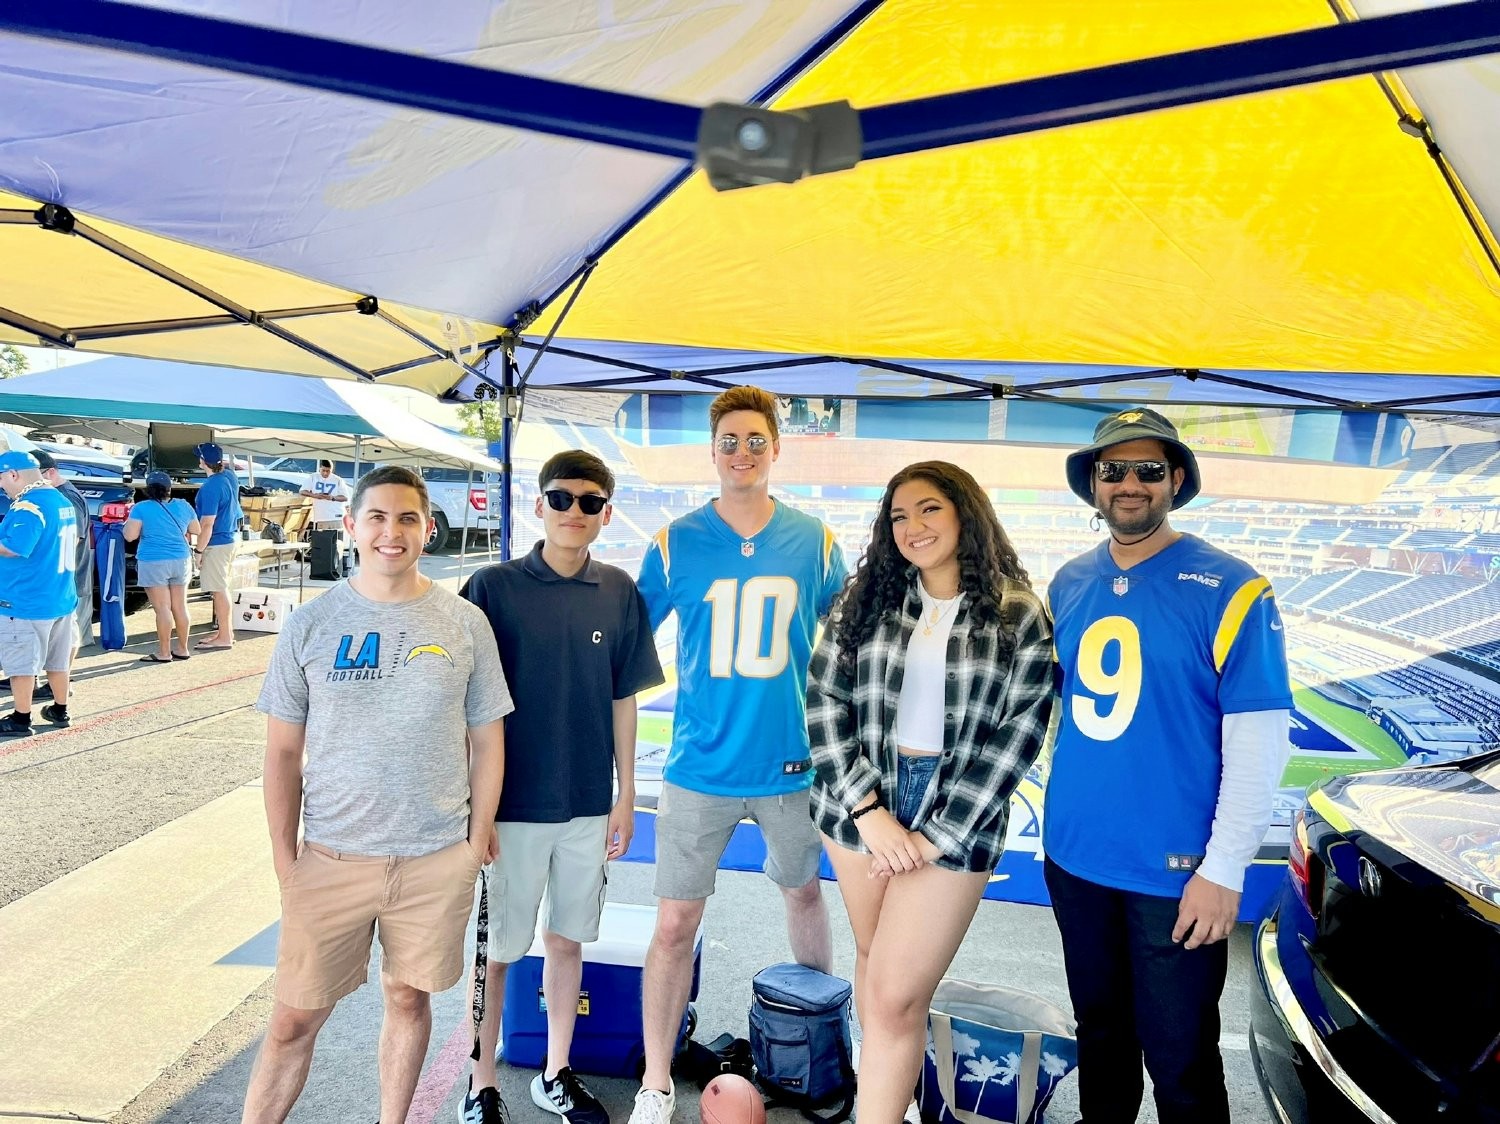 Harris Group employees in Thousand Oaks attended a football game.